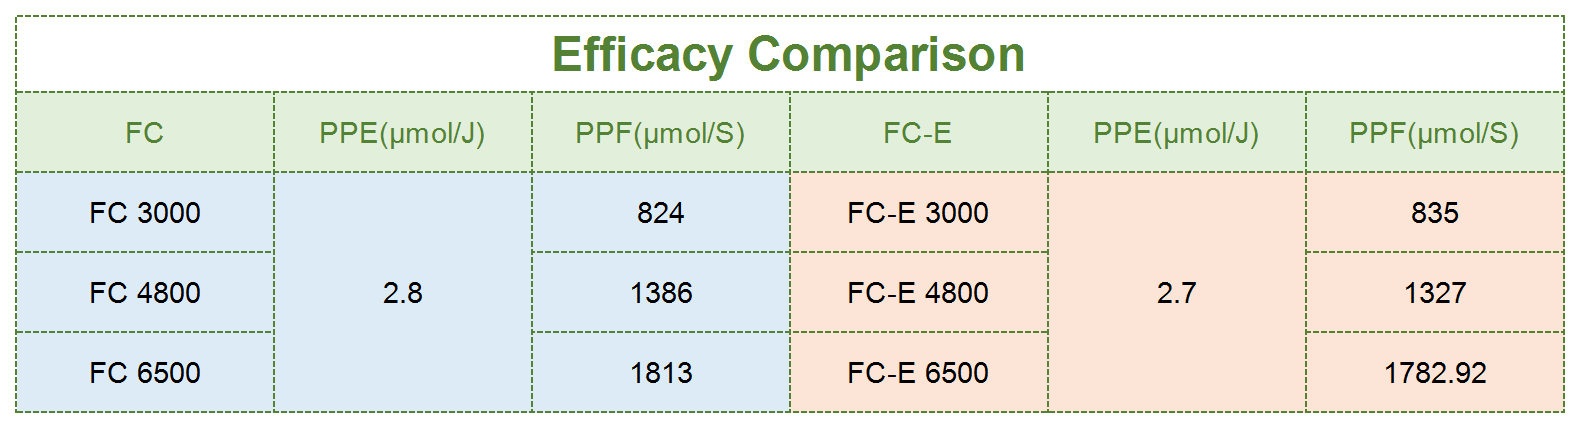 The ppe and ppf difference between FC AND FC-E SERIES